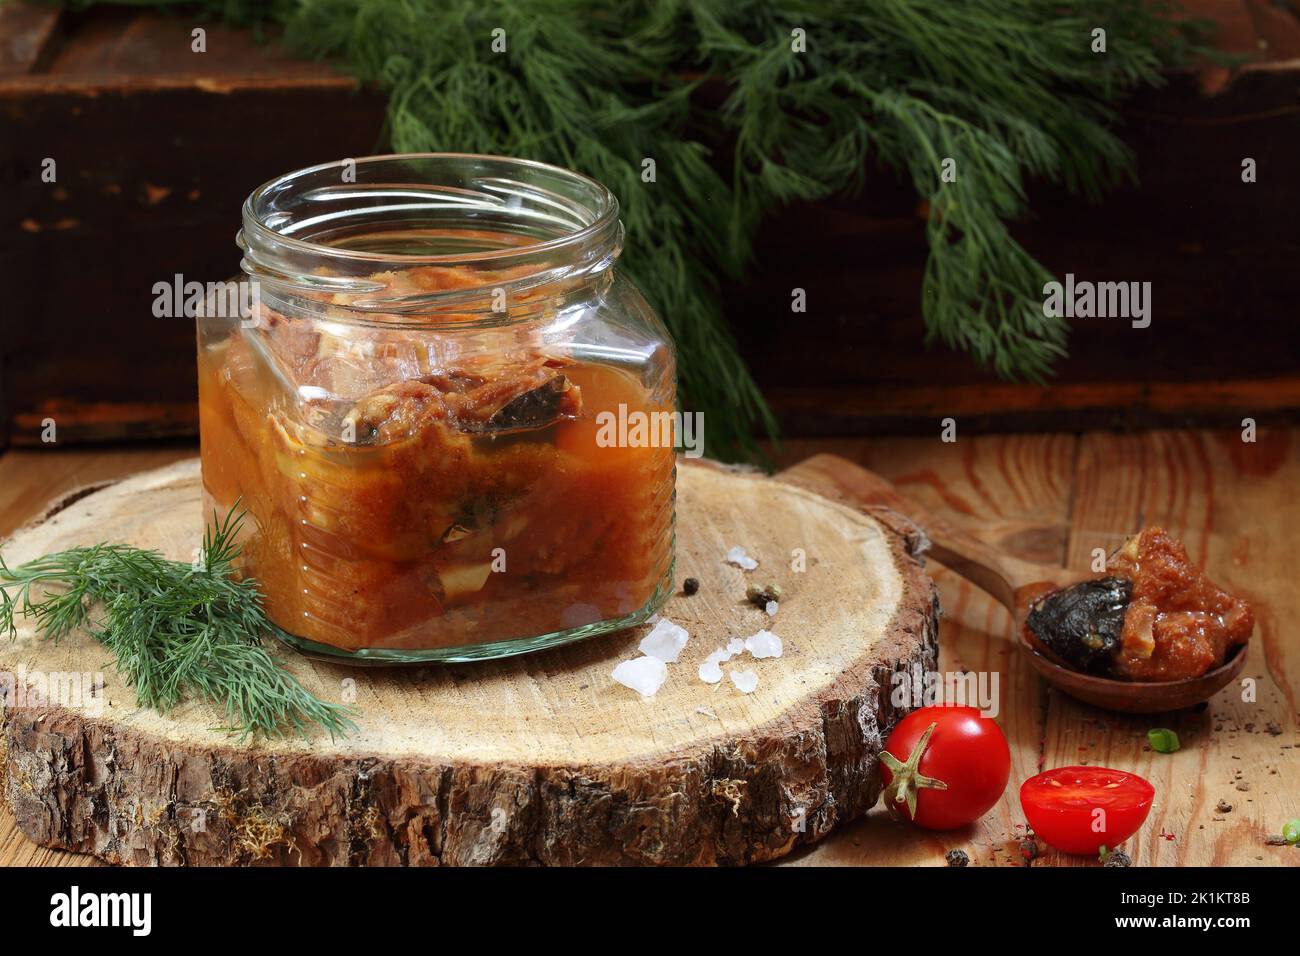 Catfish canned in tomato on a wooden table in a glass jar Stock Photo